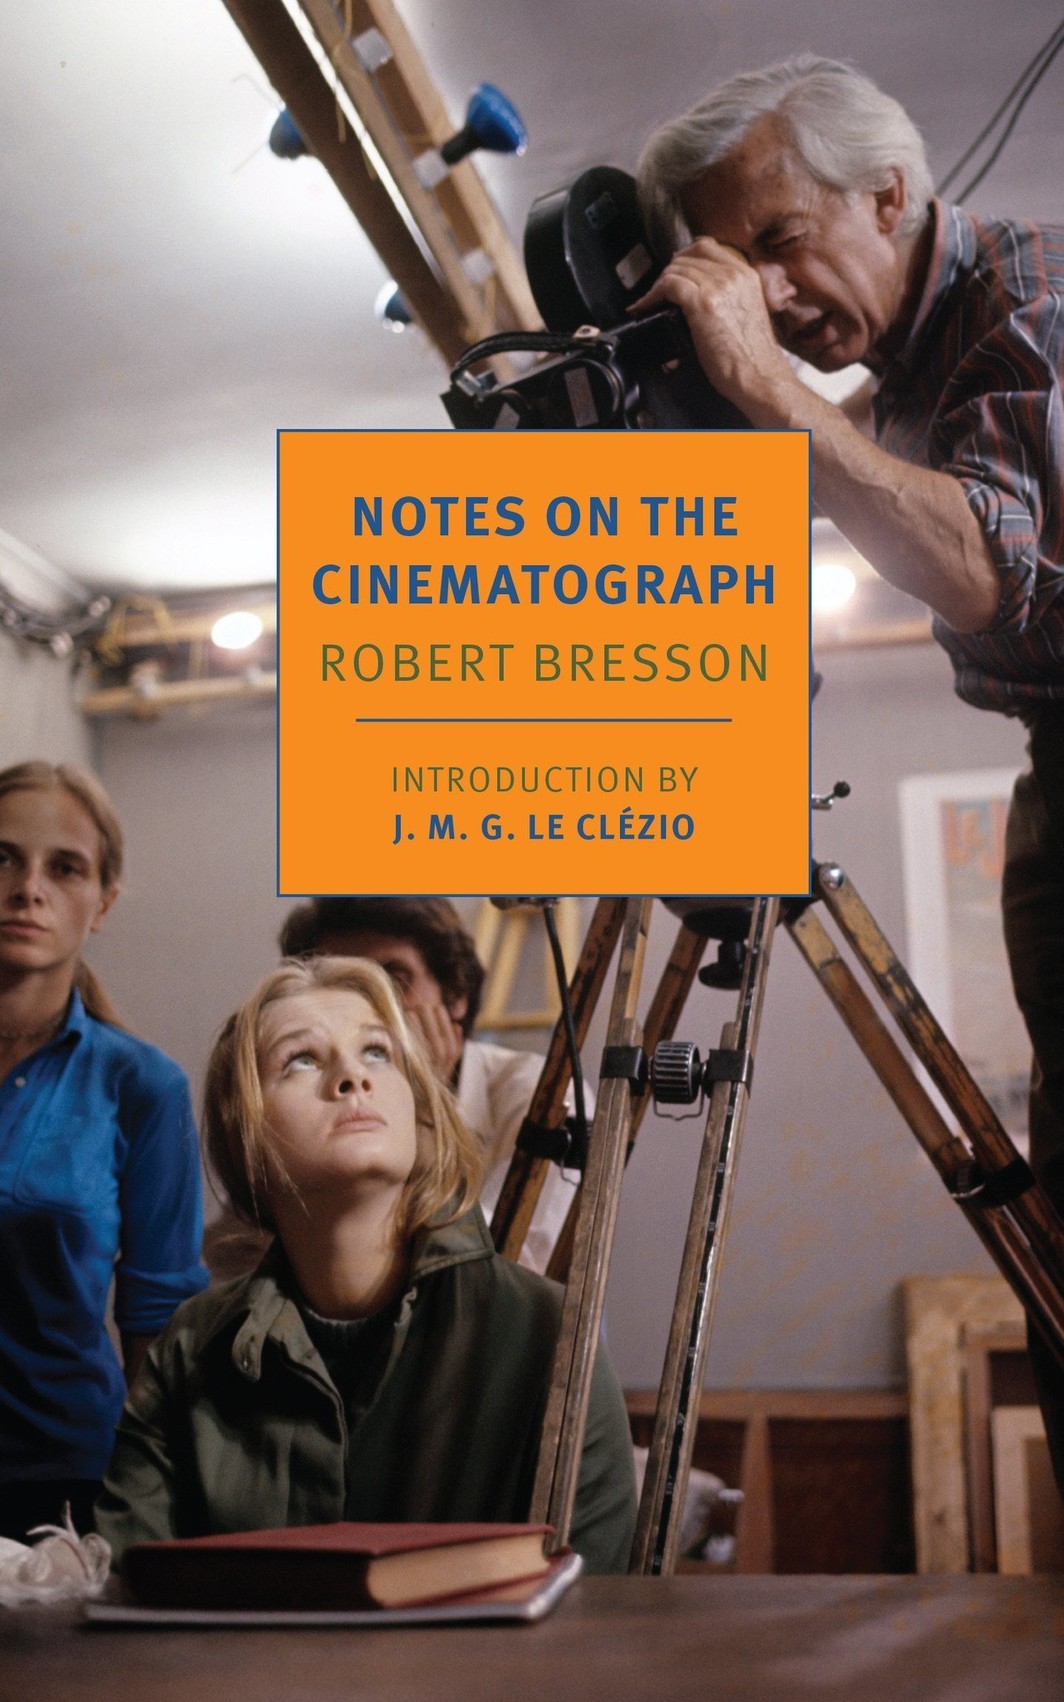 The cover of Notes on the Cinematograph